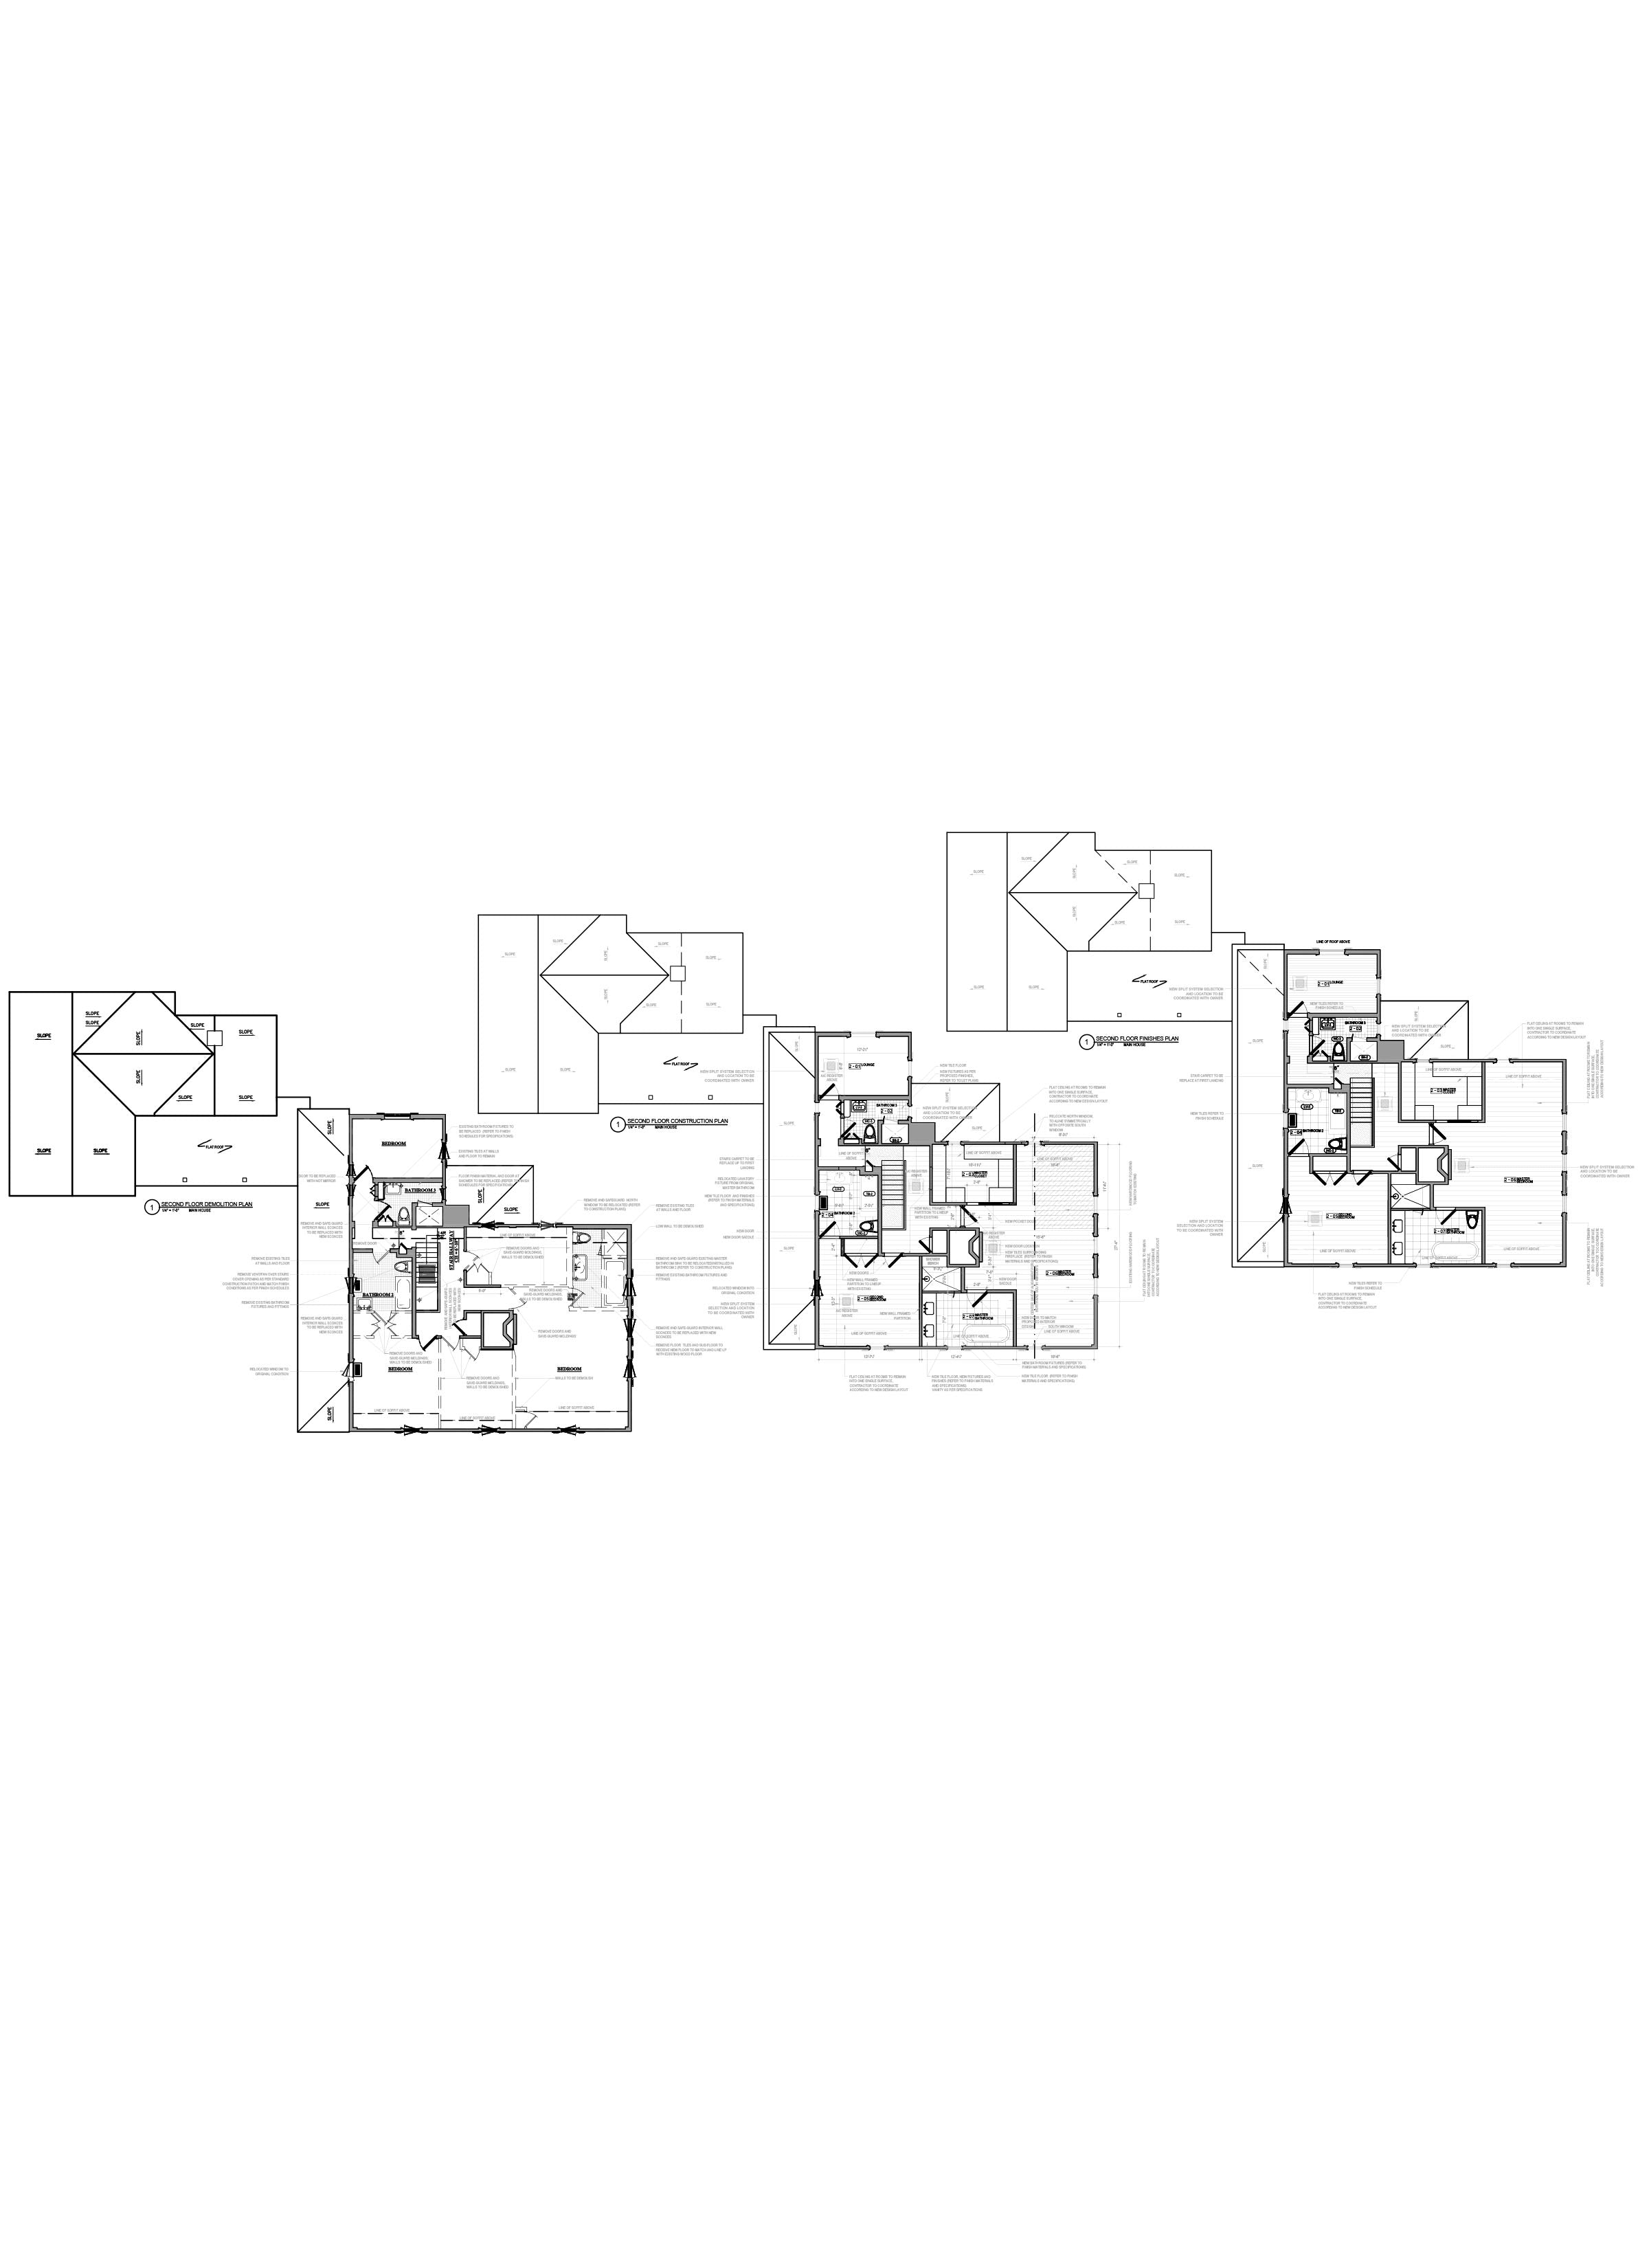 Floor plan design - As Built Drawings - AutoCAD drafting_HomeApartment_Brewster, NY